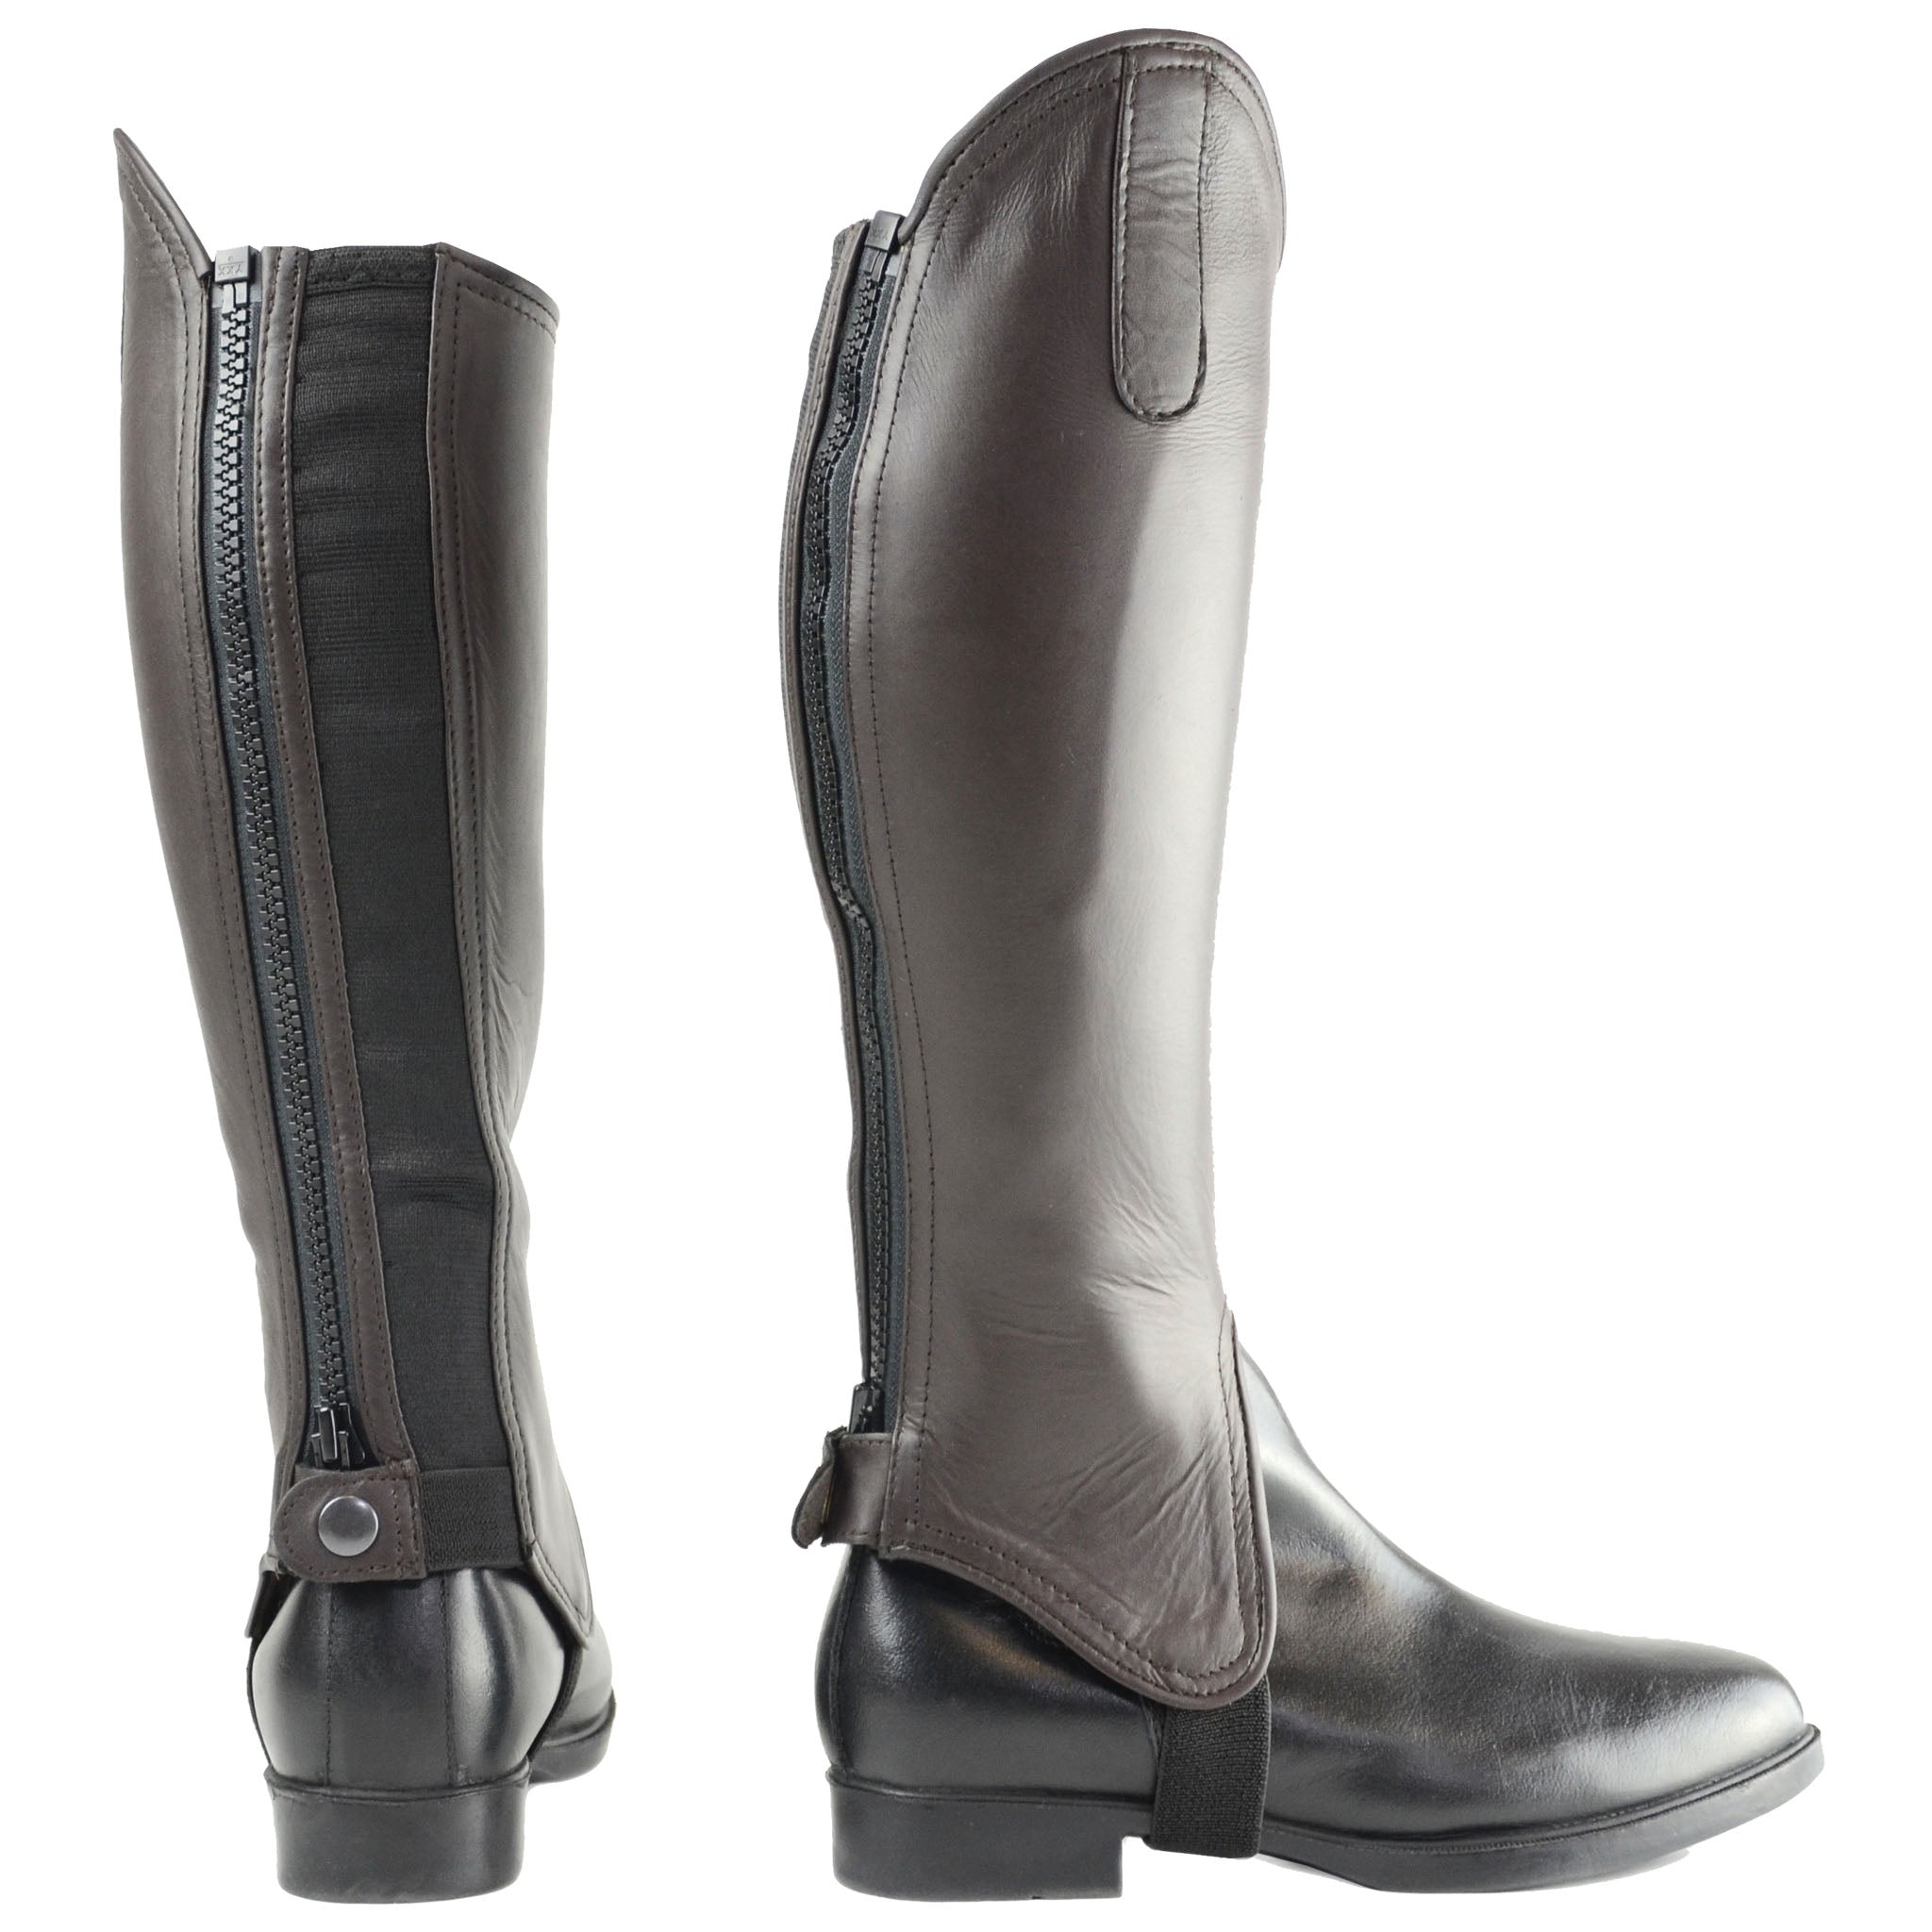 Hy Leather Gaiters - A High Quality Smart Leather Gaiter - Male Equestrian